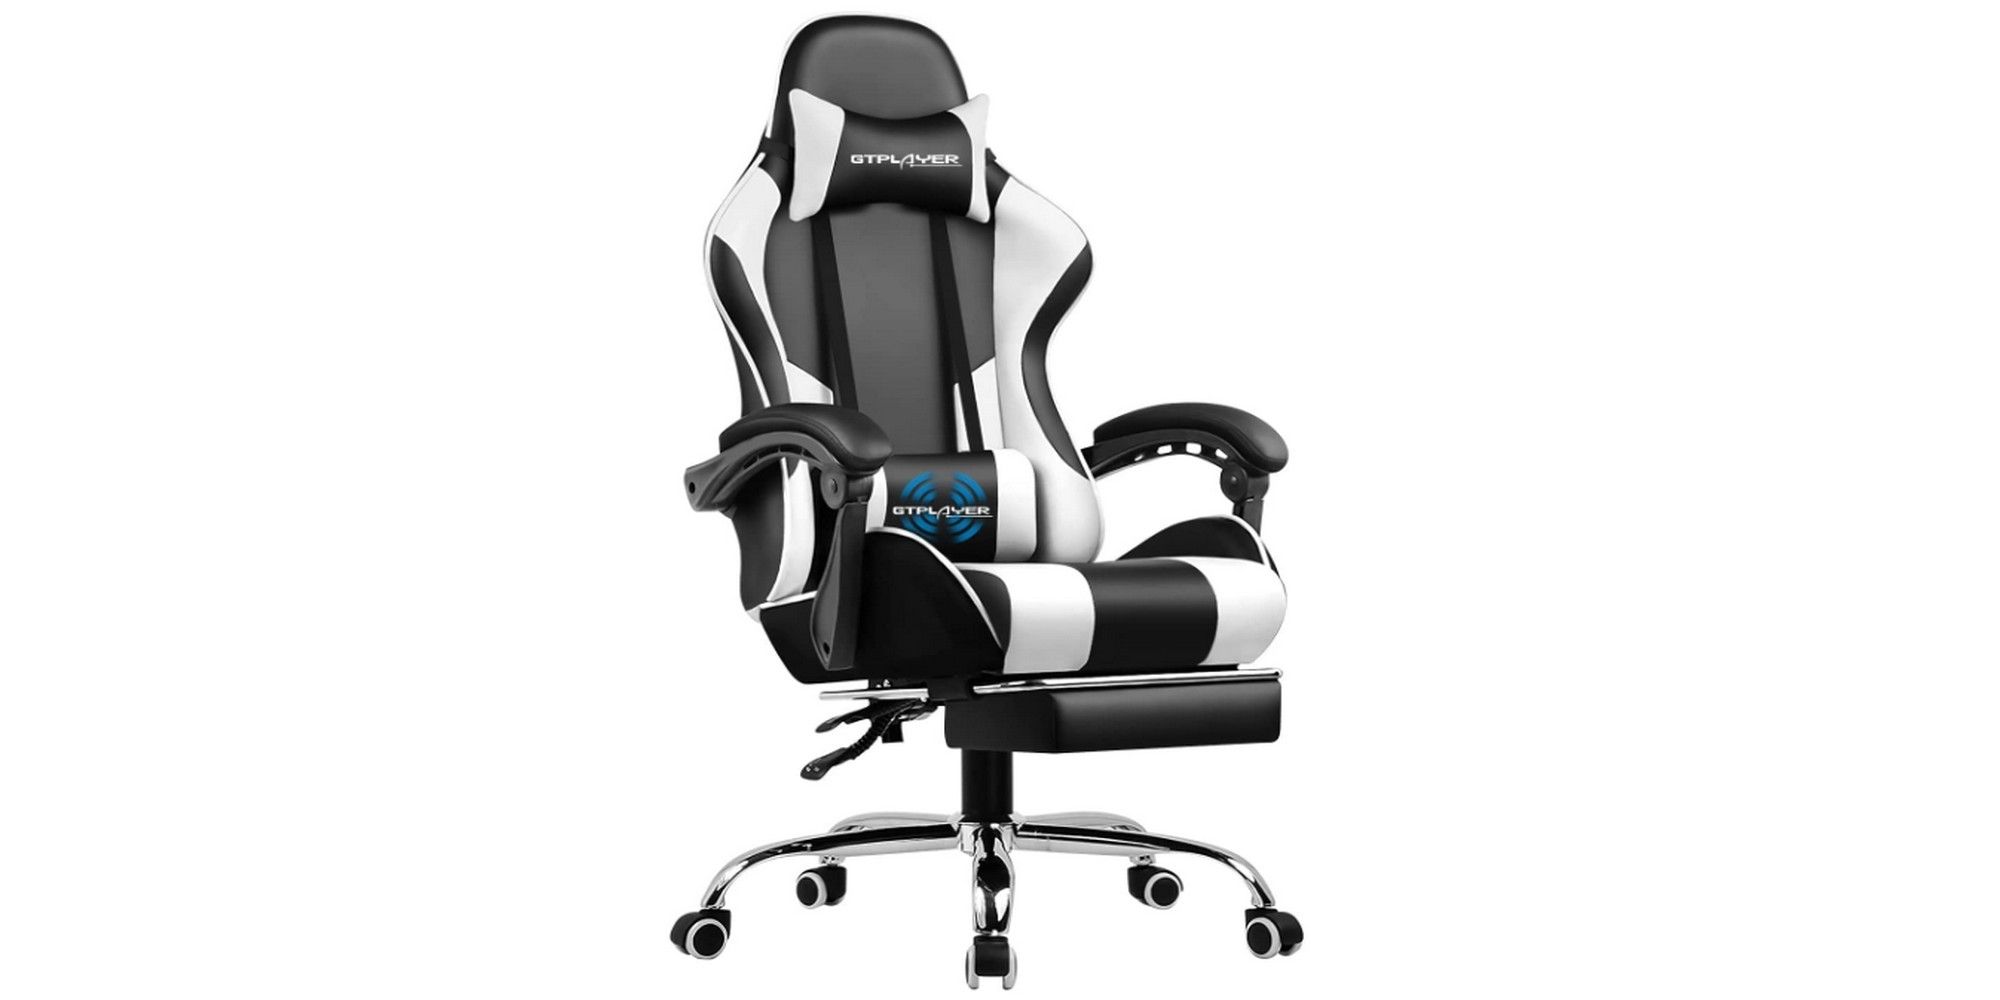 gtplayer massaging lumbar support gaming chair buyer's guide